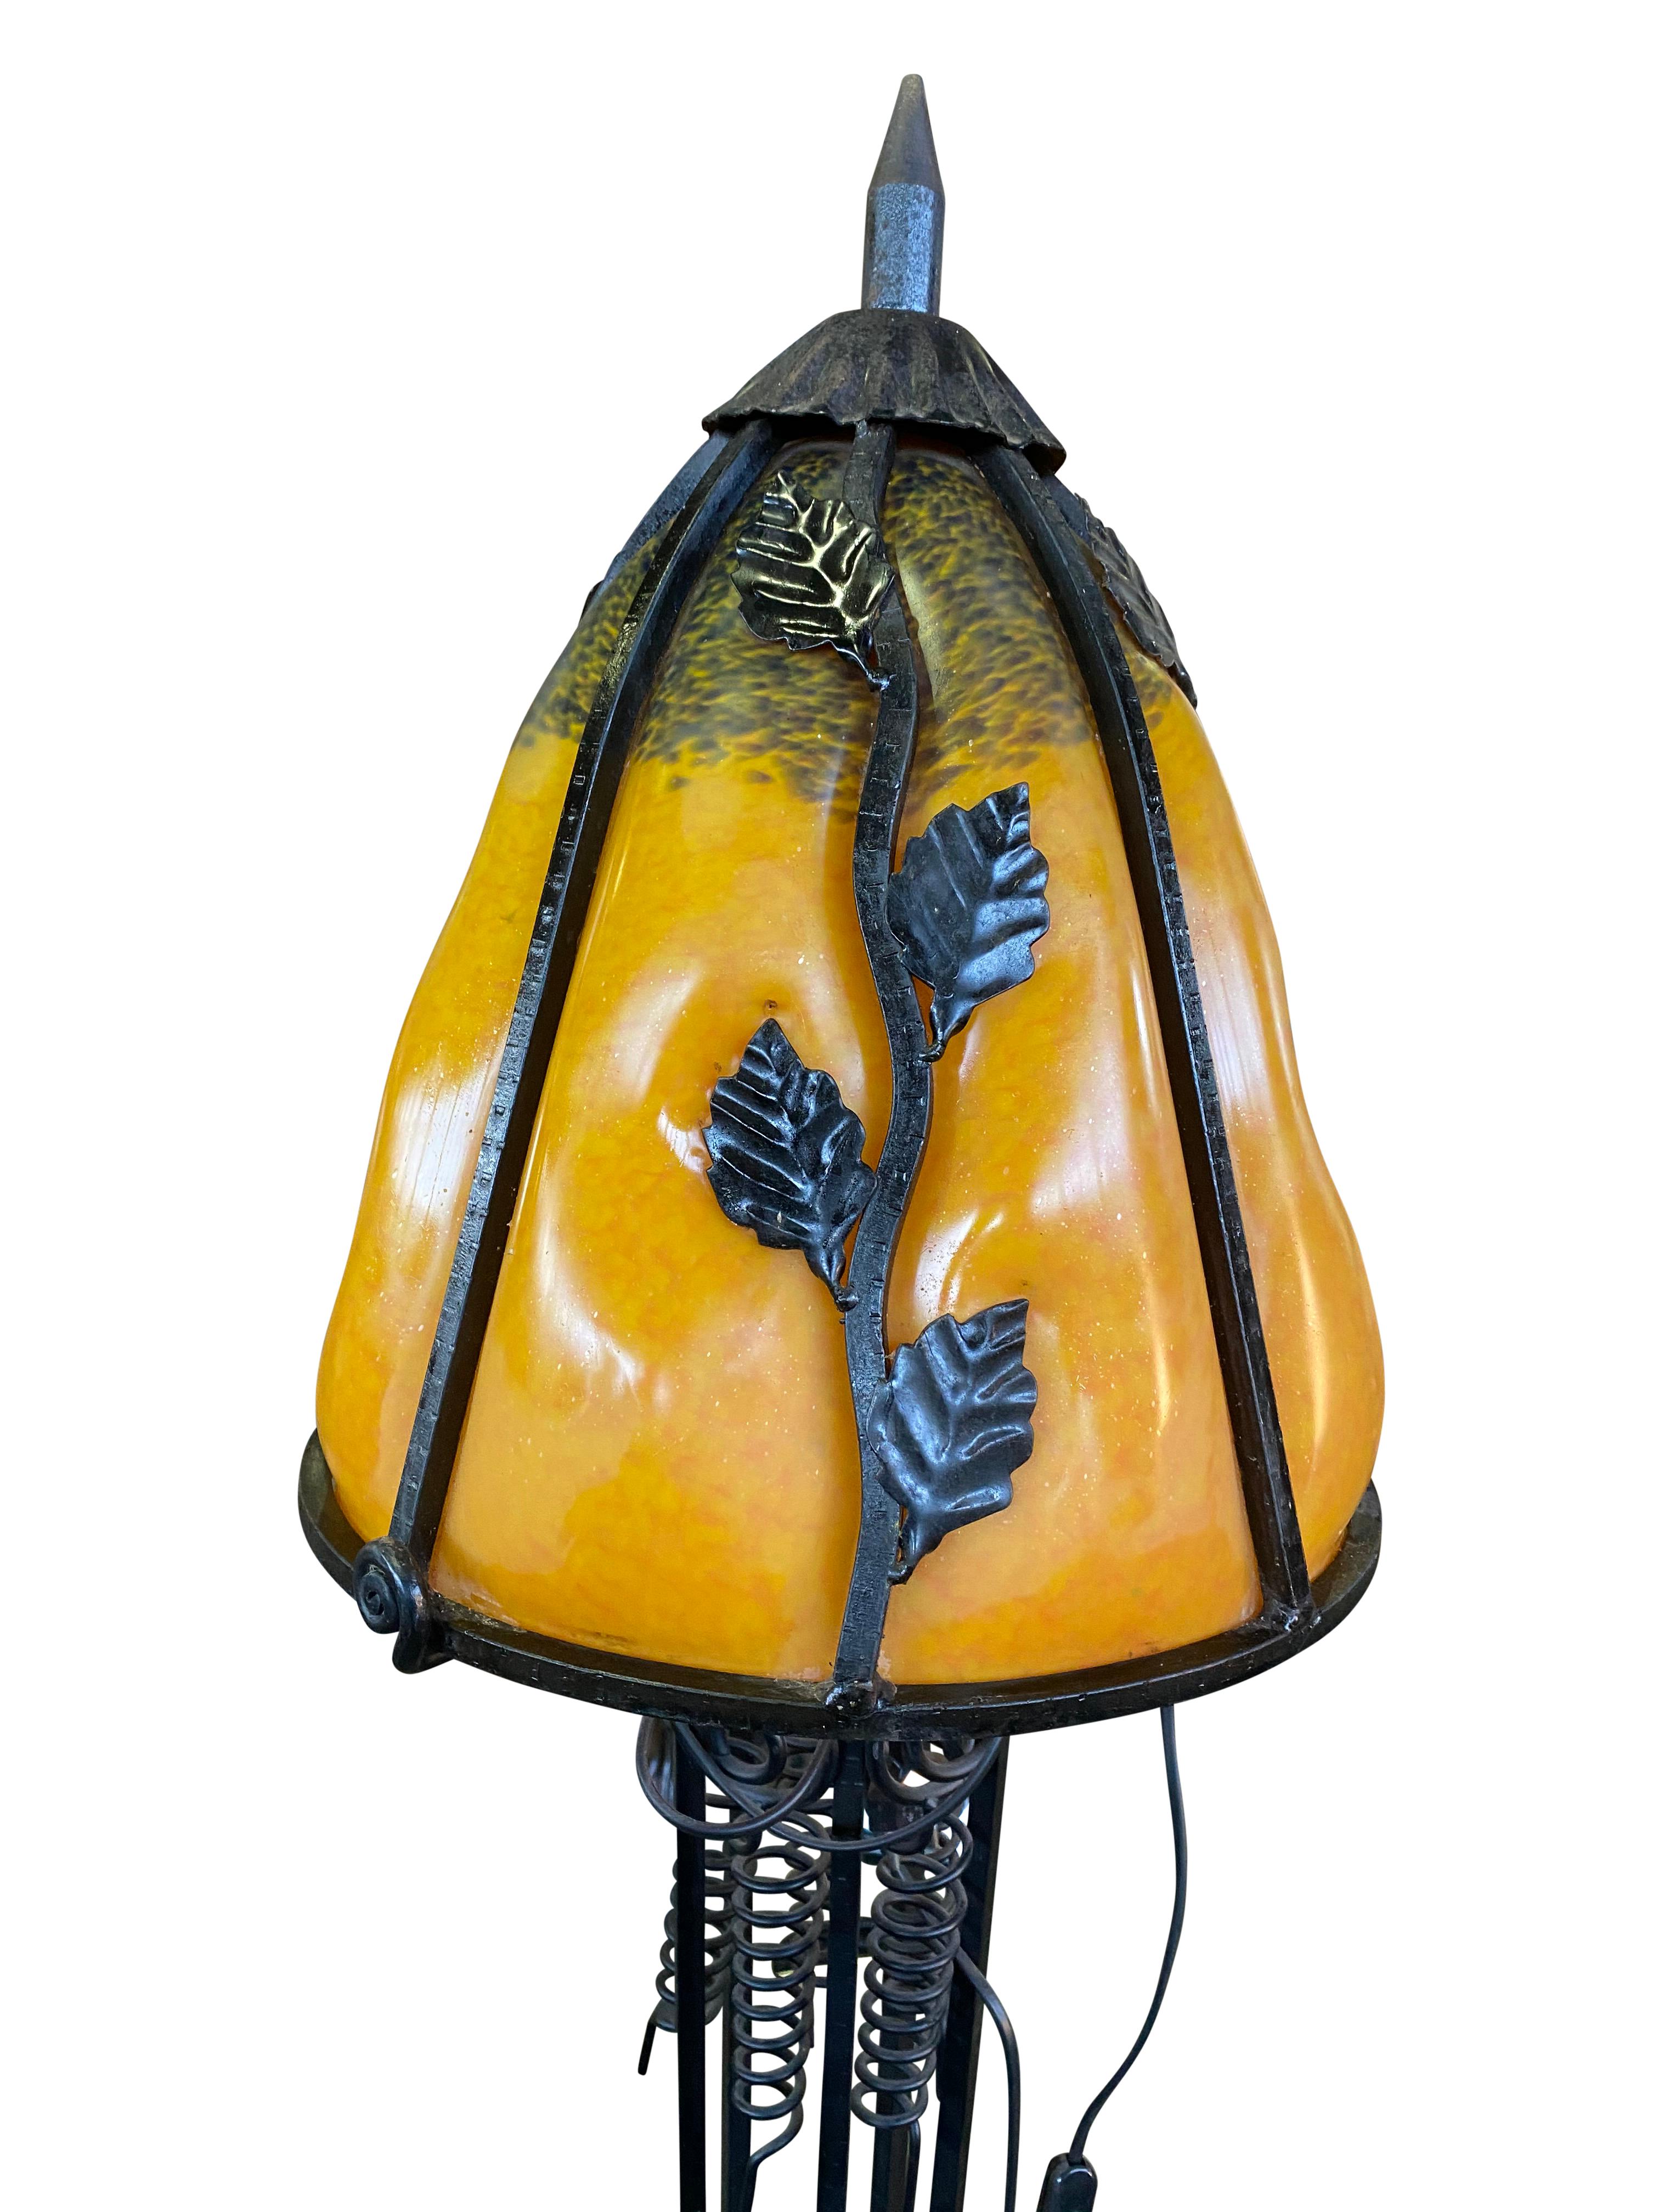 Hand-Crafted French Art Nouveau Style Lamp in Wrought Iron with Colored Glass Shades